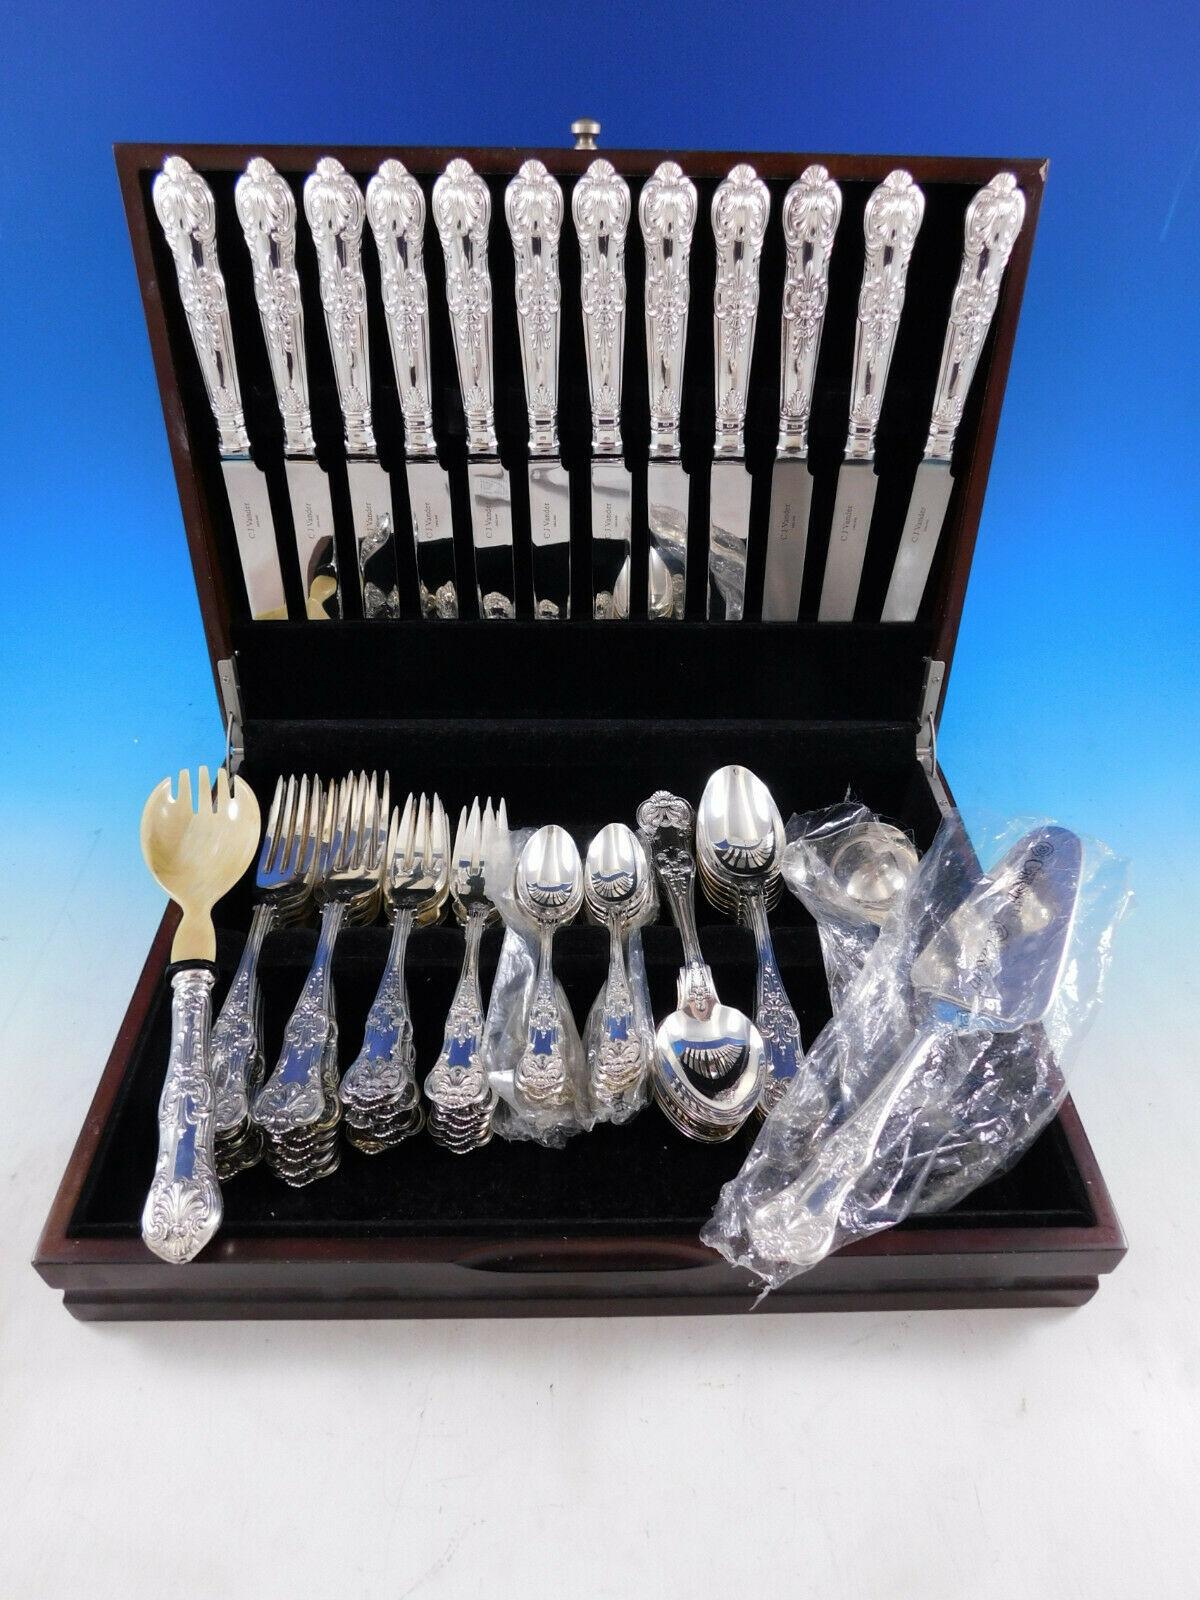 Lorena by Cassetti - Italy silver flatware set - 63 pieces (including the CJ Vander Dinner knives). This pattern features a Classic shell motif. The pieces are large & heavy. This set includes:
12 dinner size knives by CJ Vander, 10